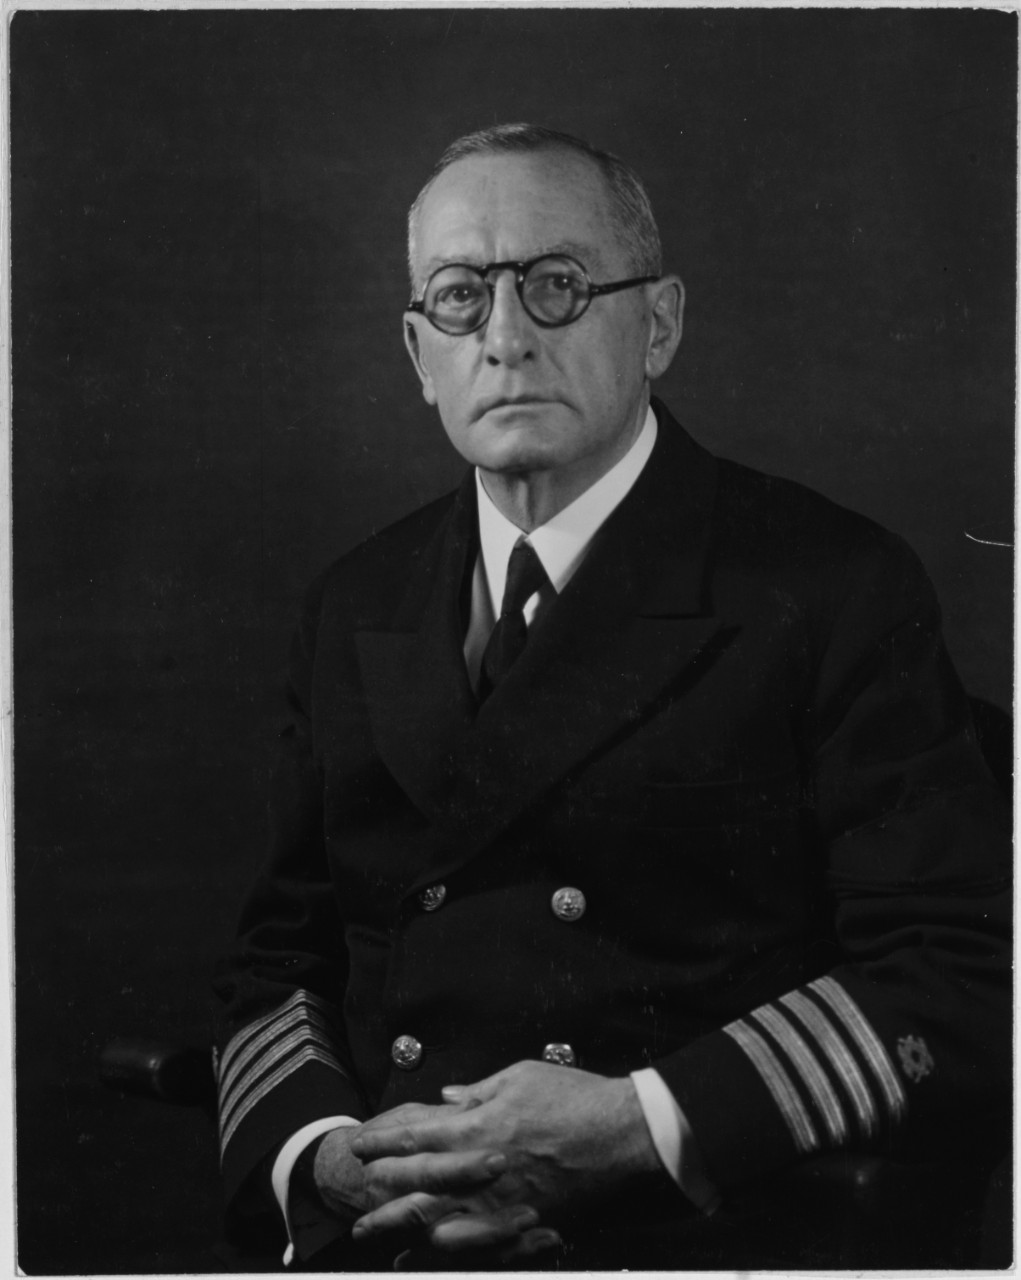 Frederick H. Cooke, Captain (CEC) USN, Civil Engineering Corps.